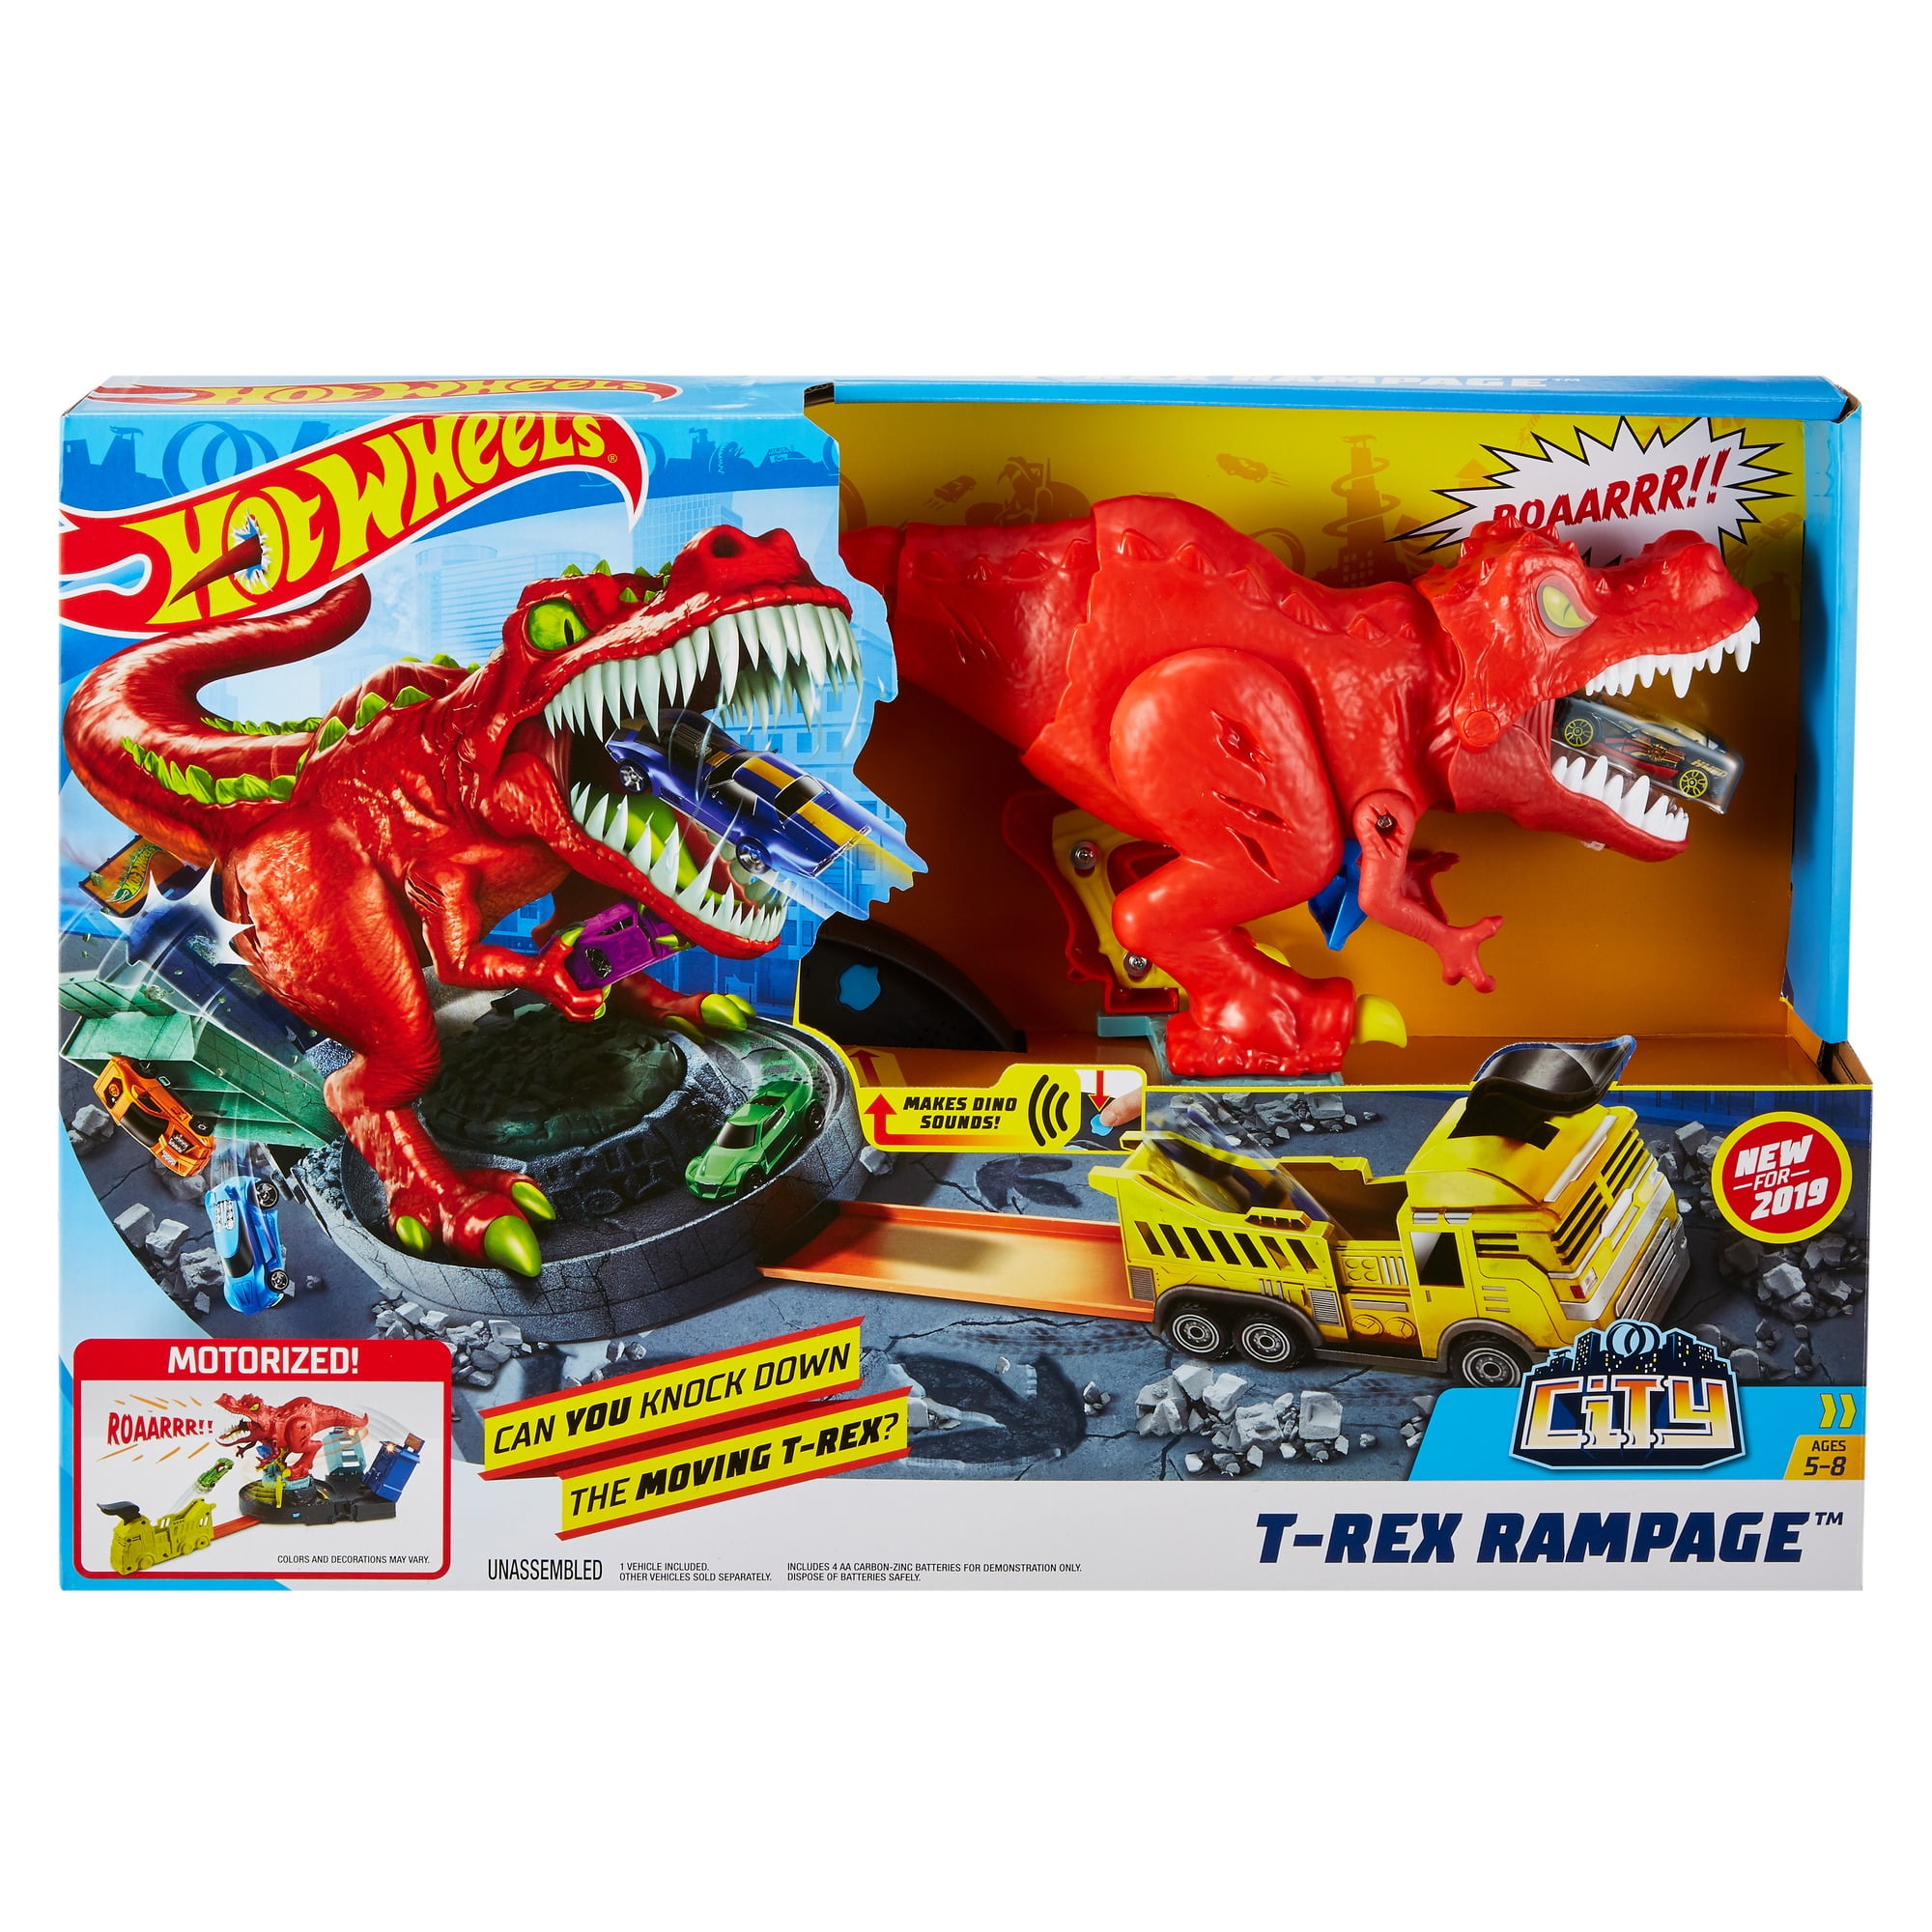 HOT WHEELS CITY MOTORIZED T-REX RAMPAGE GFH88 NEW IN BOX FAST/FREE SHIPPING 